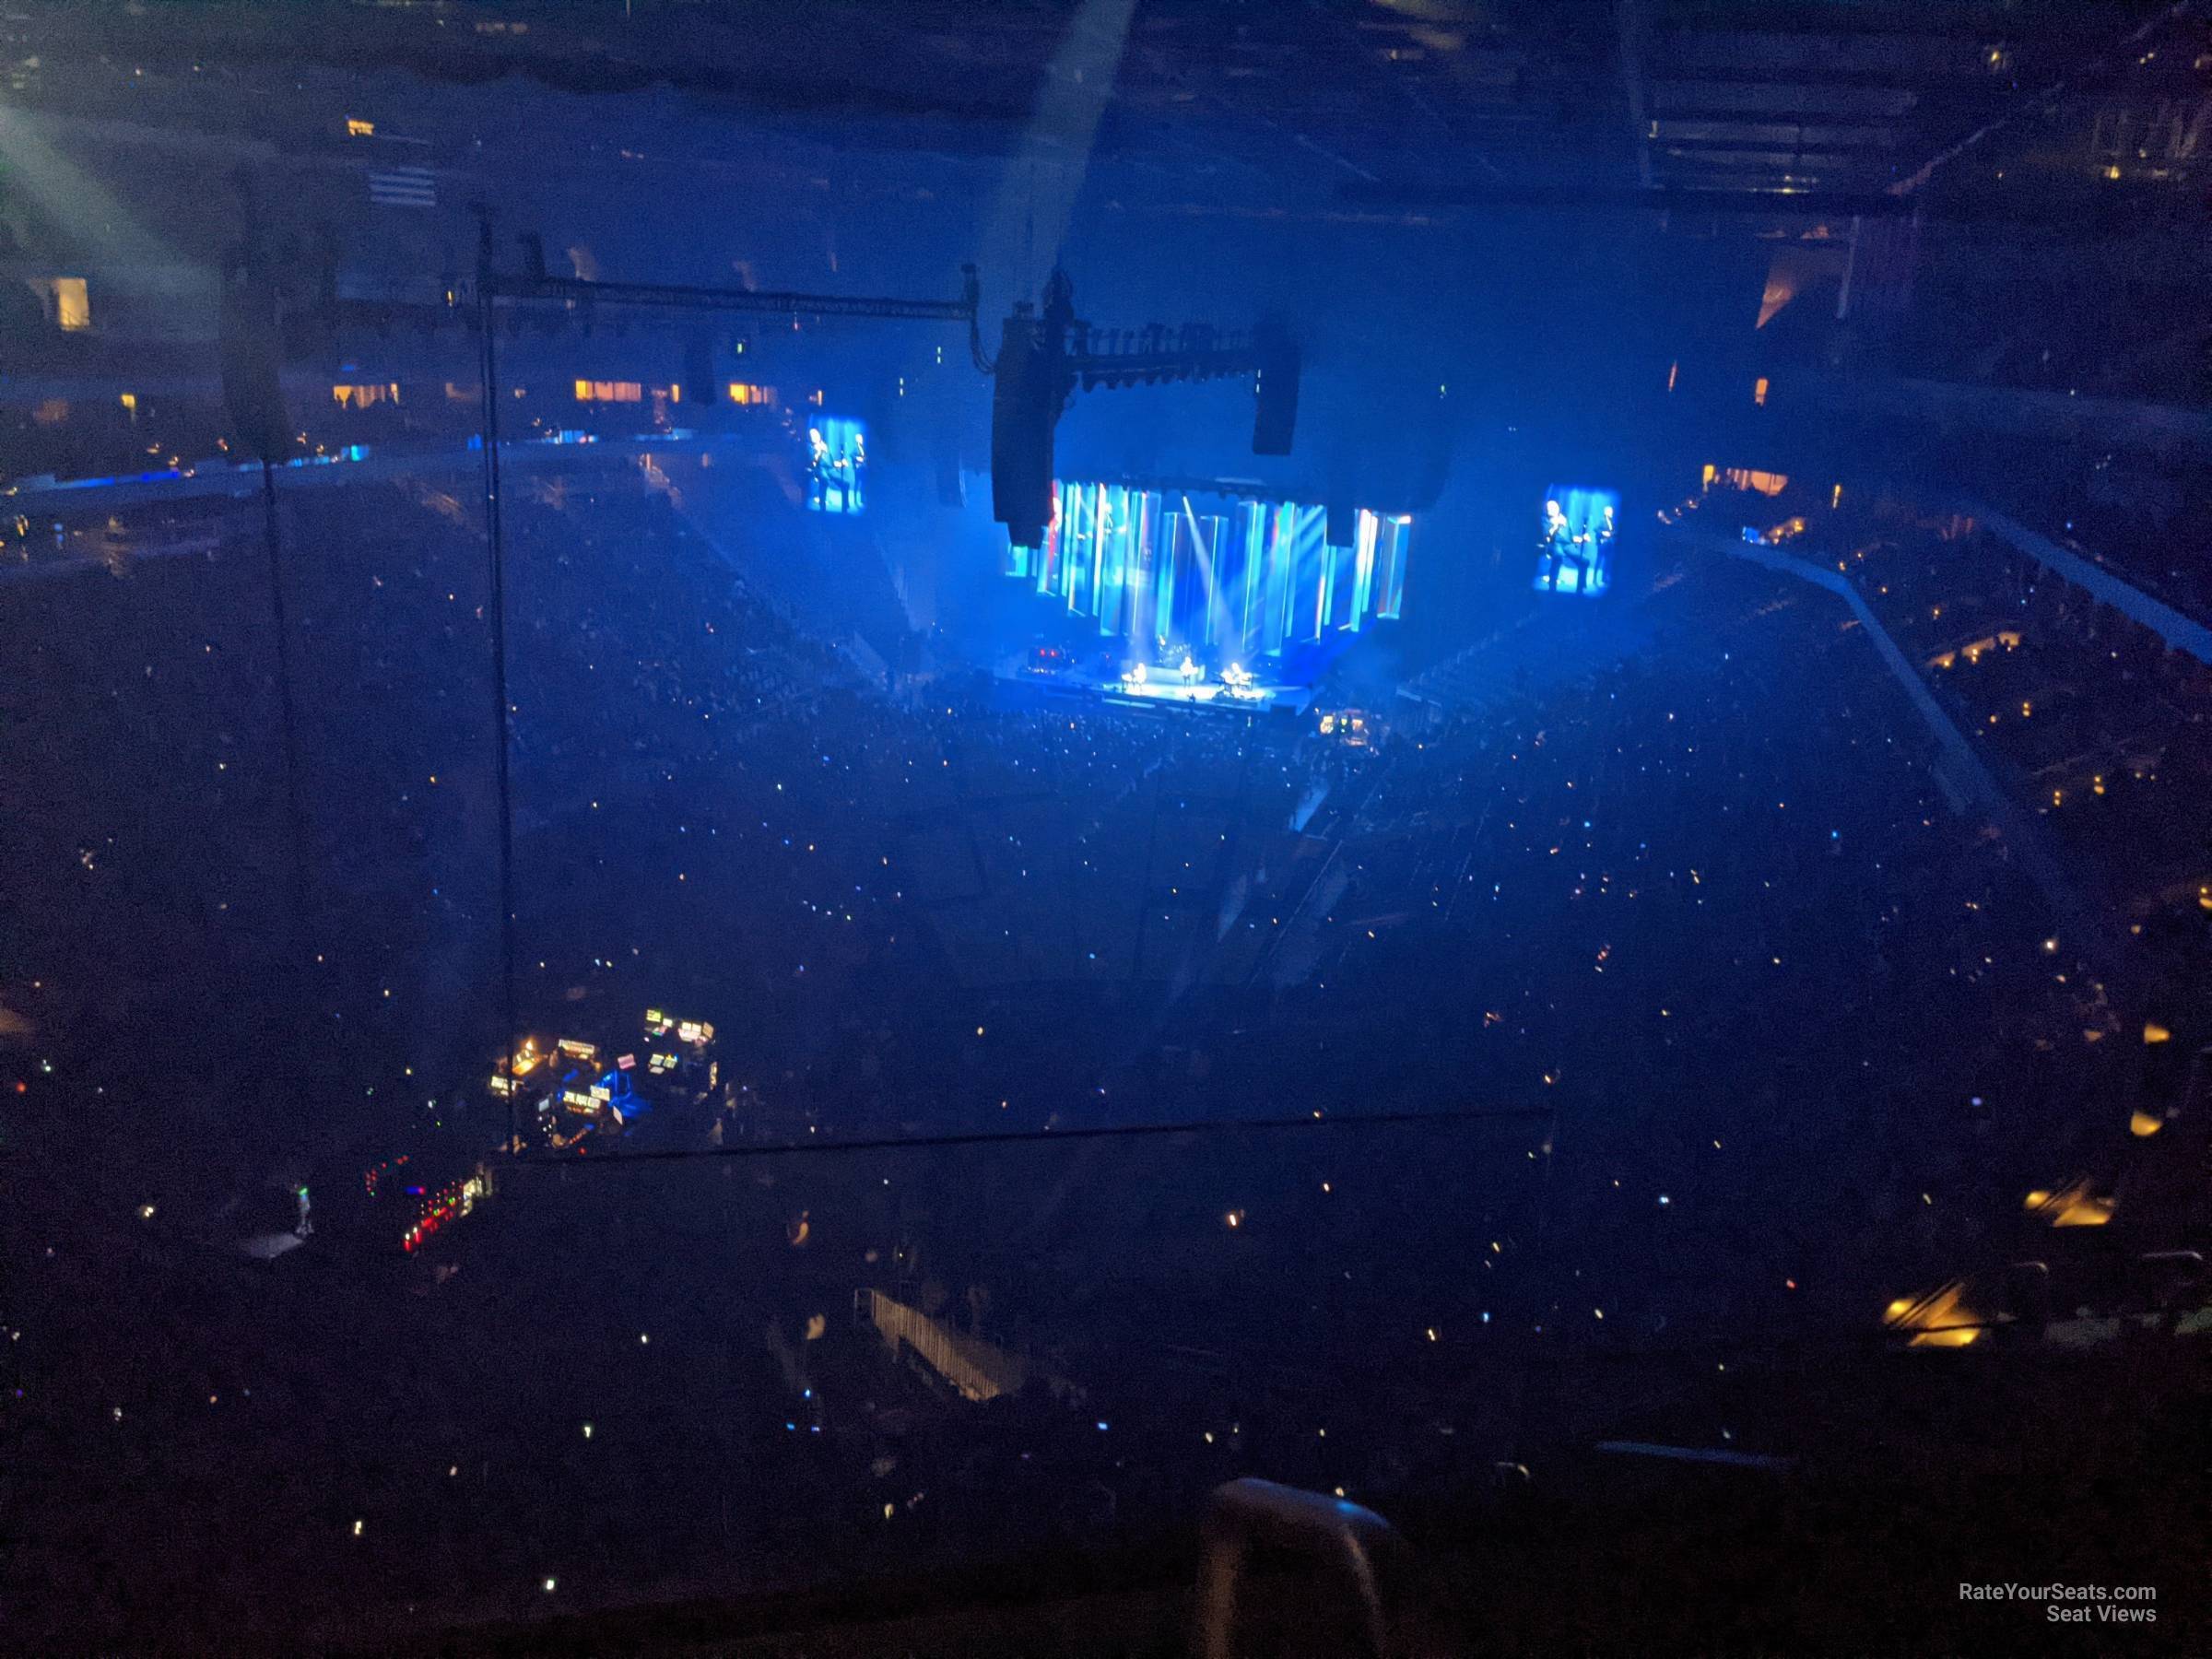 section 312, row 2 seat view  for concert - ubs arena